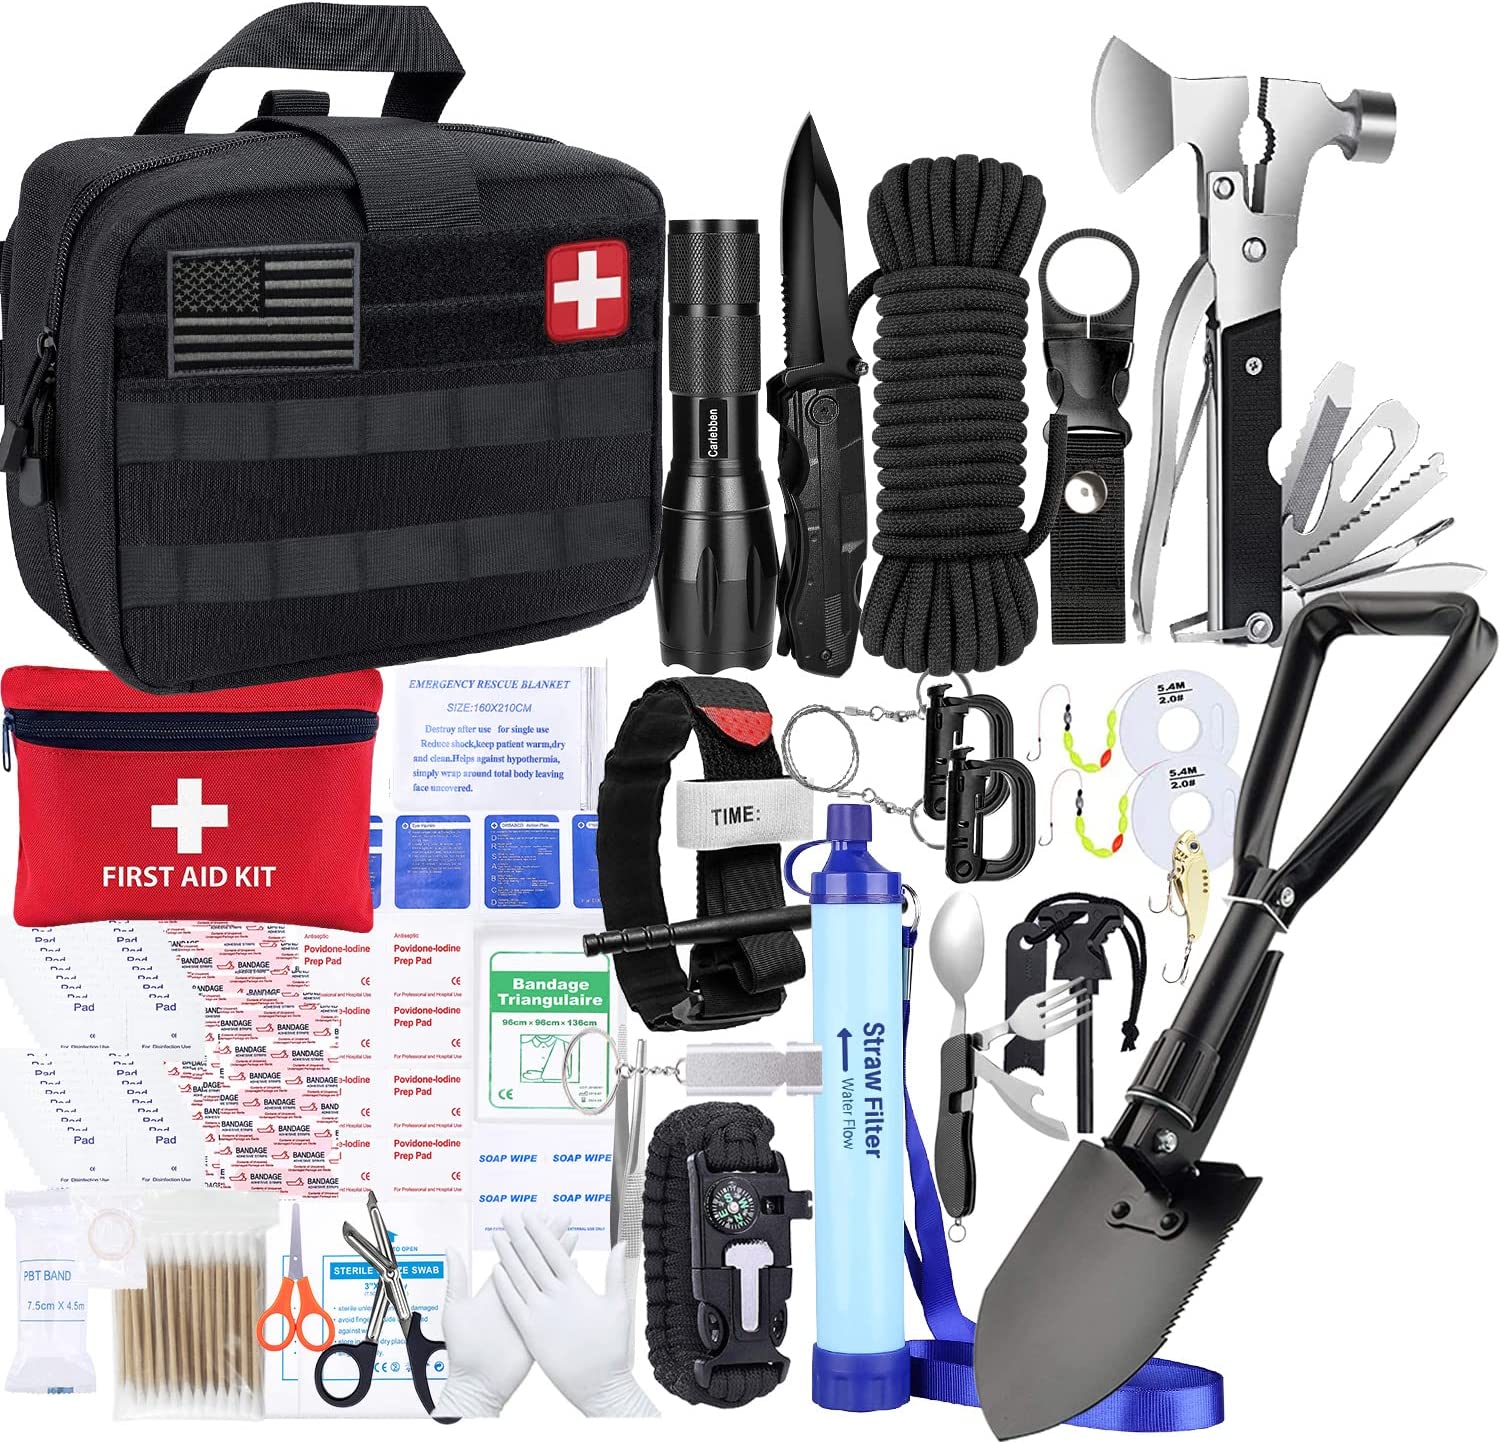 Roundup of Survival Kits